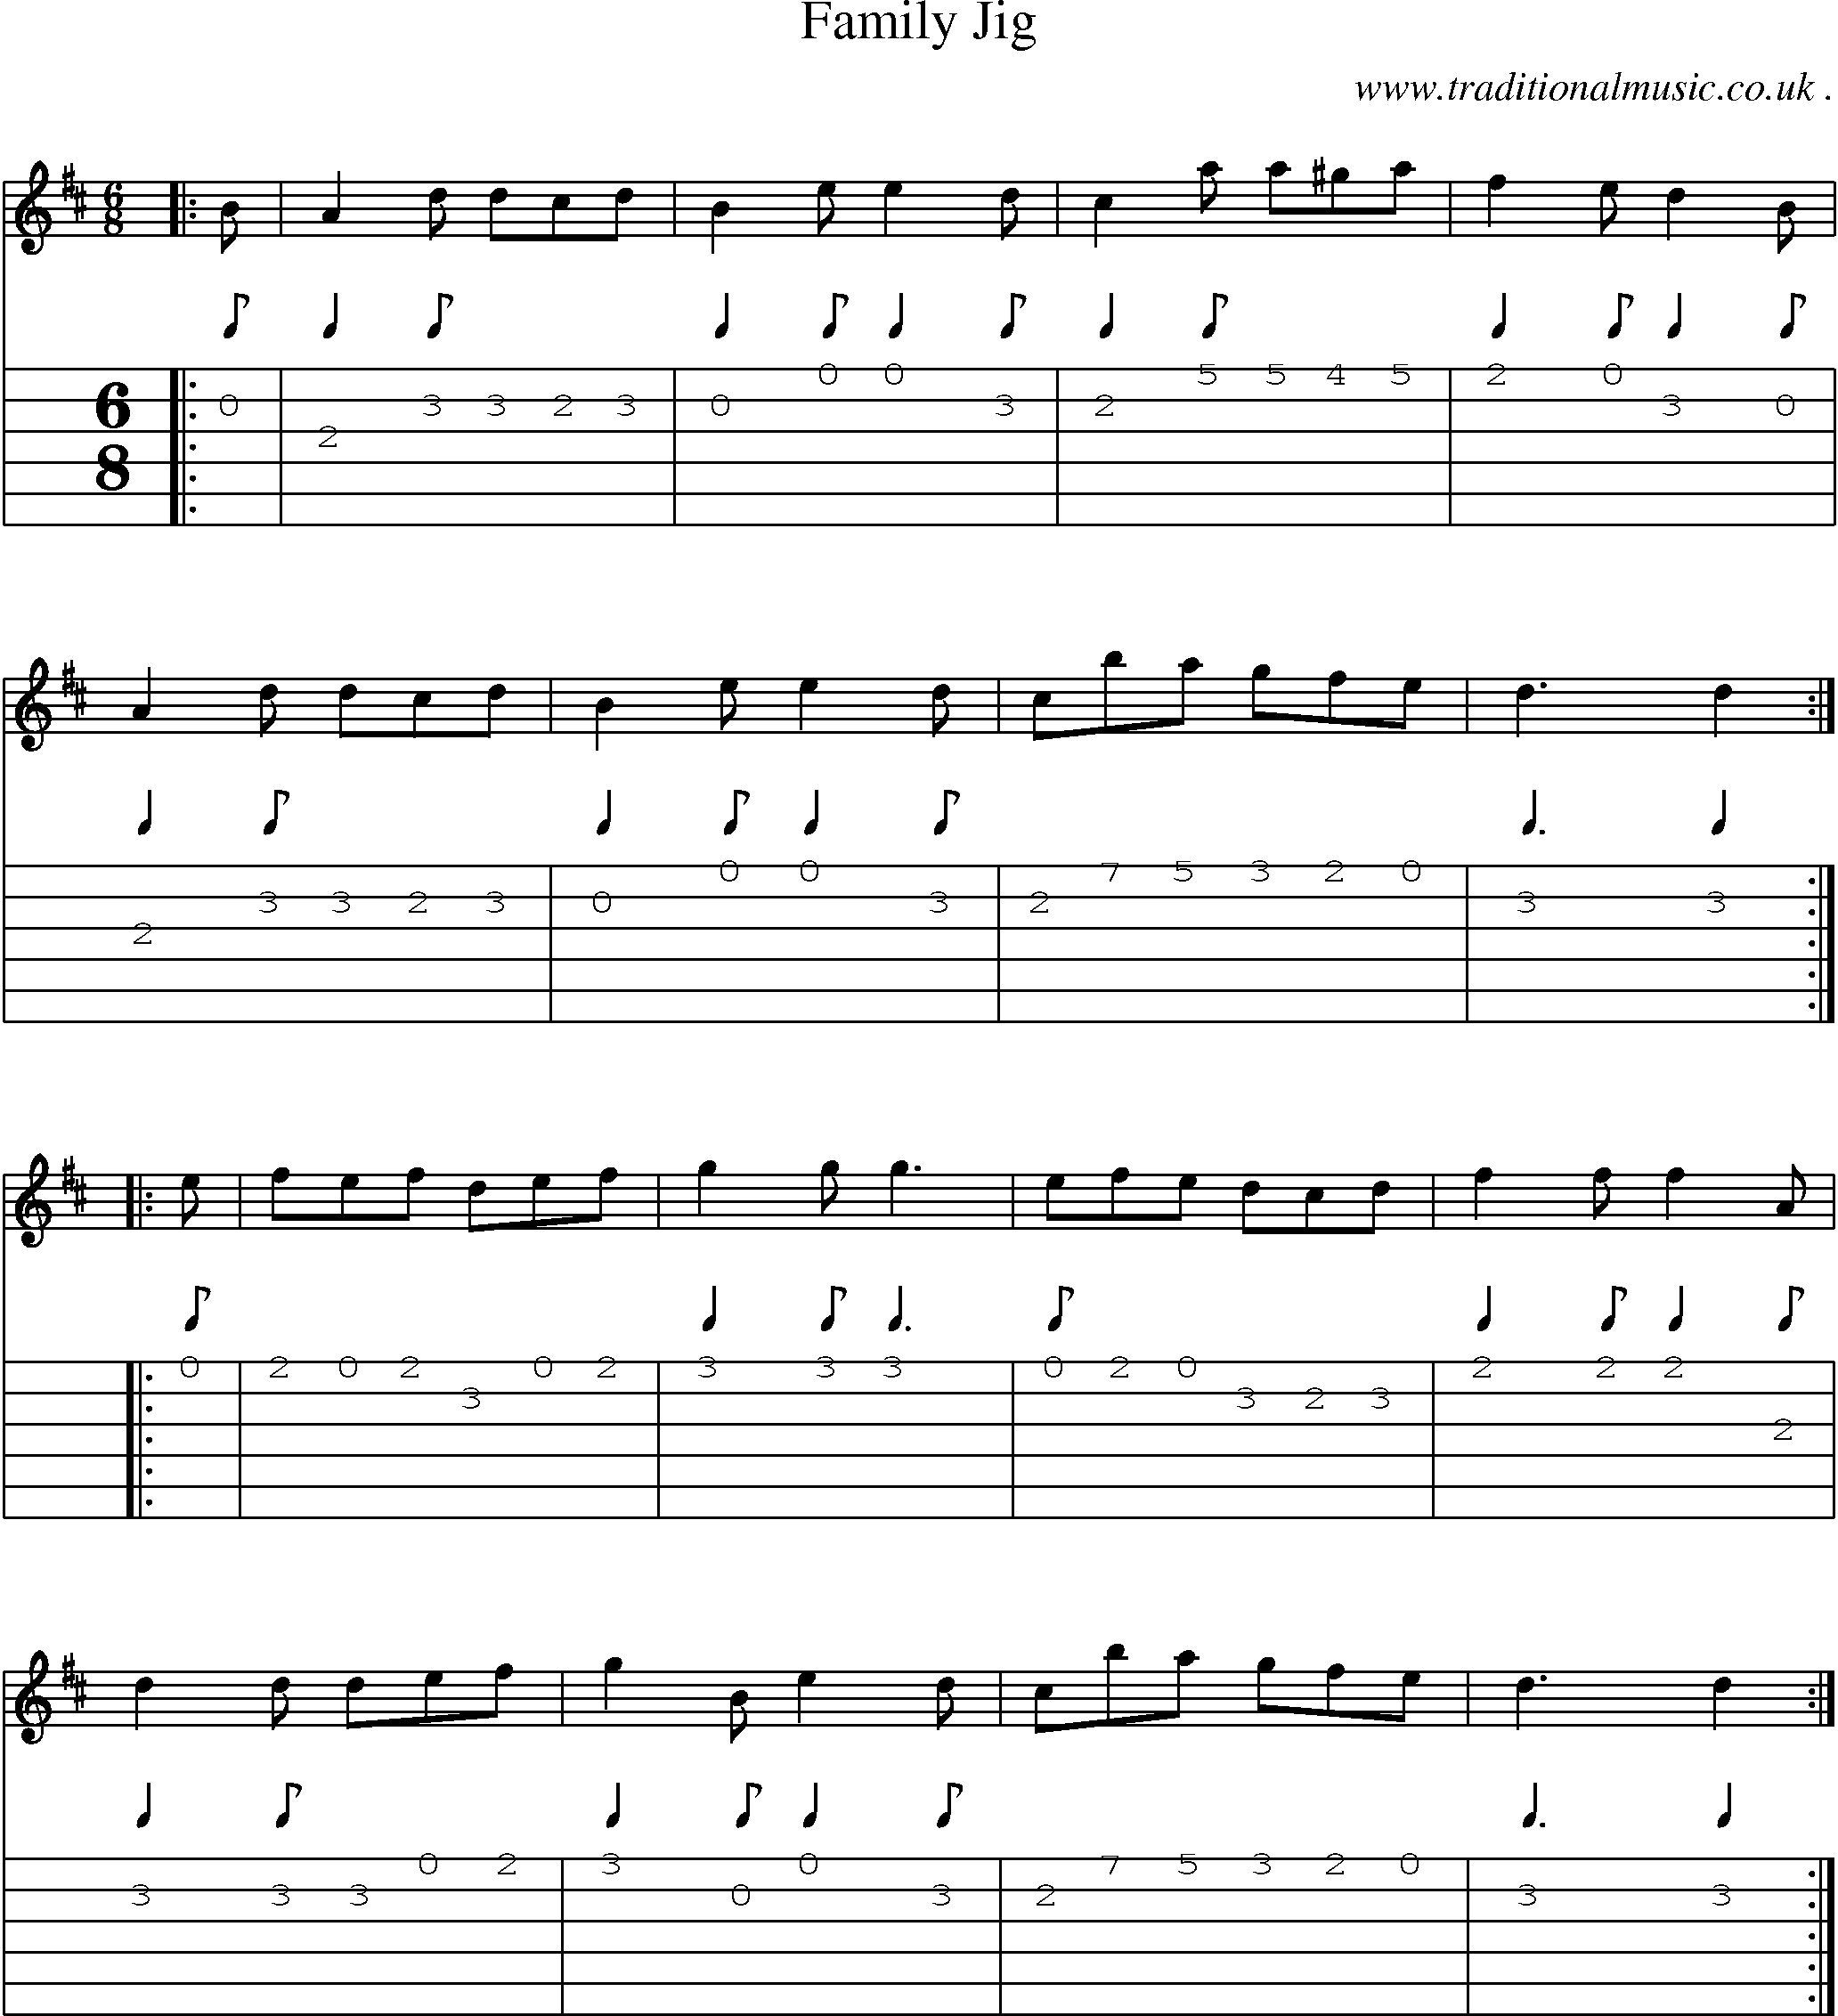 Sheet-Music and Guitar Tabs for Family Jig